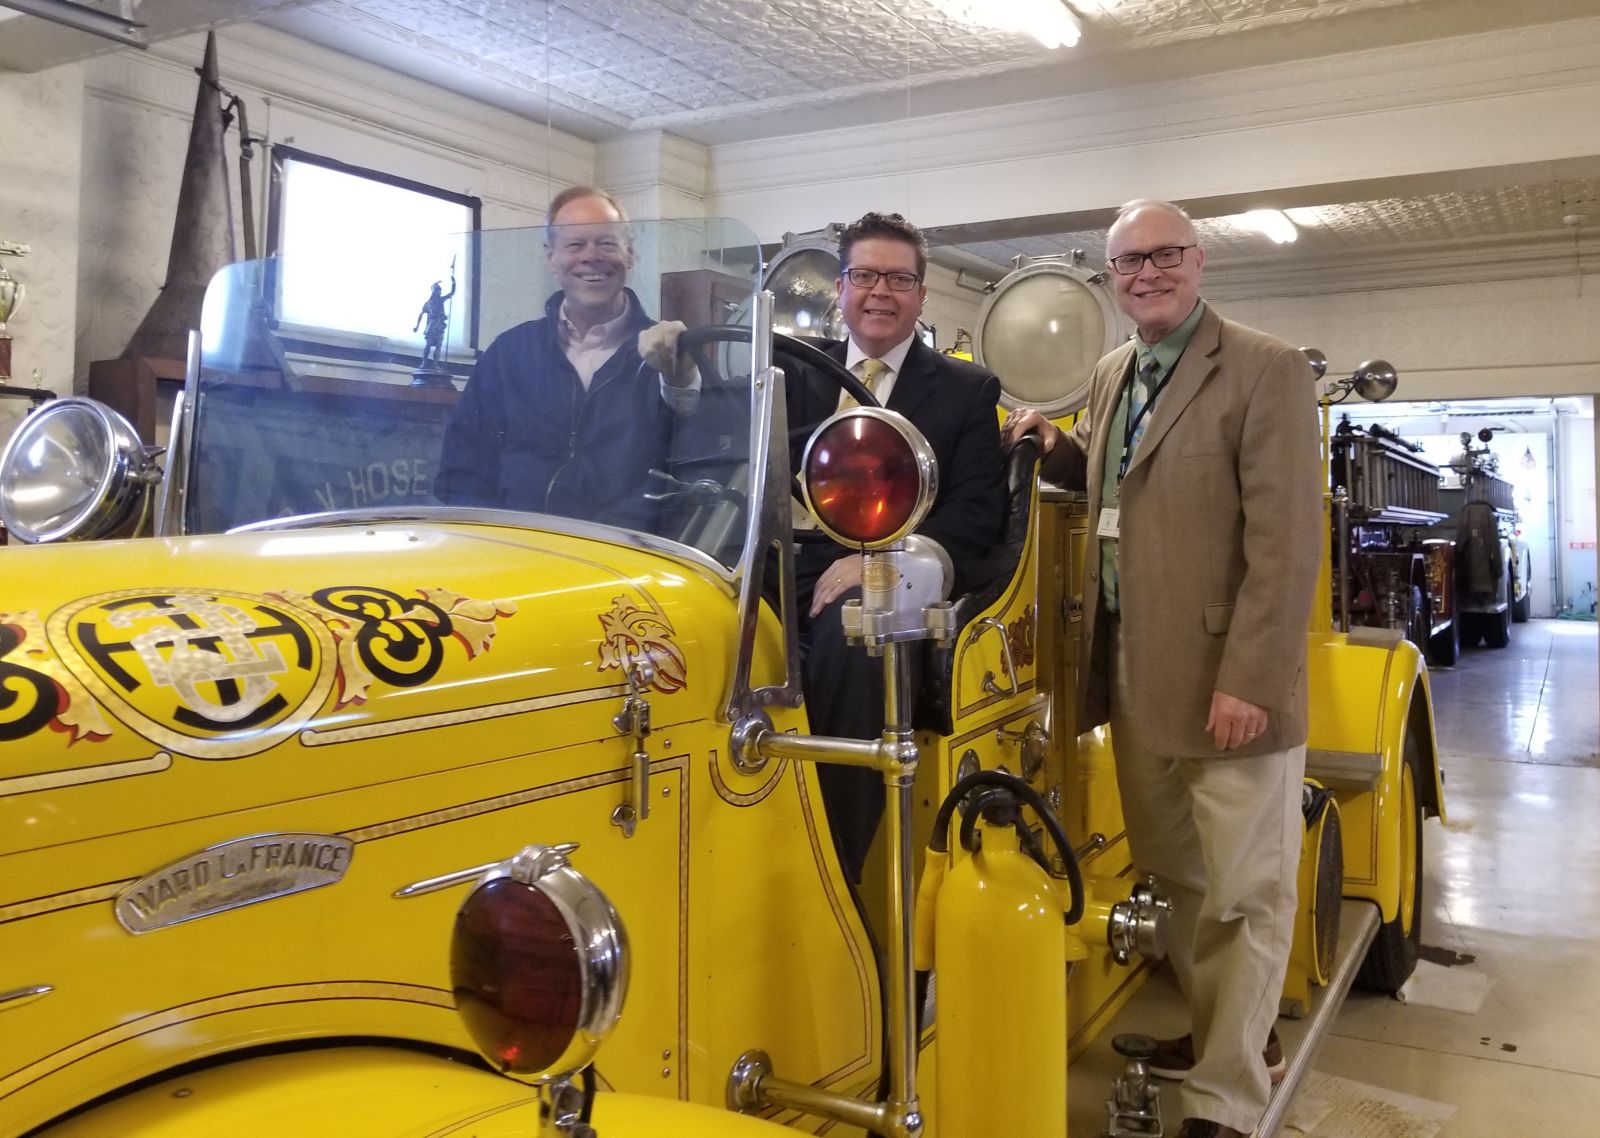 Commissioner Bob Ziobrowski, Commissioner Chairman Dave Keller, and Commissioner Bob Thomas in a fire truck at the Chambersburg Volunteer Firemans Museum.